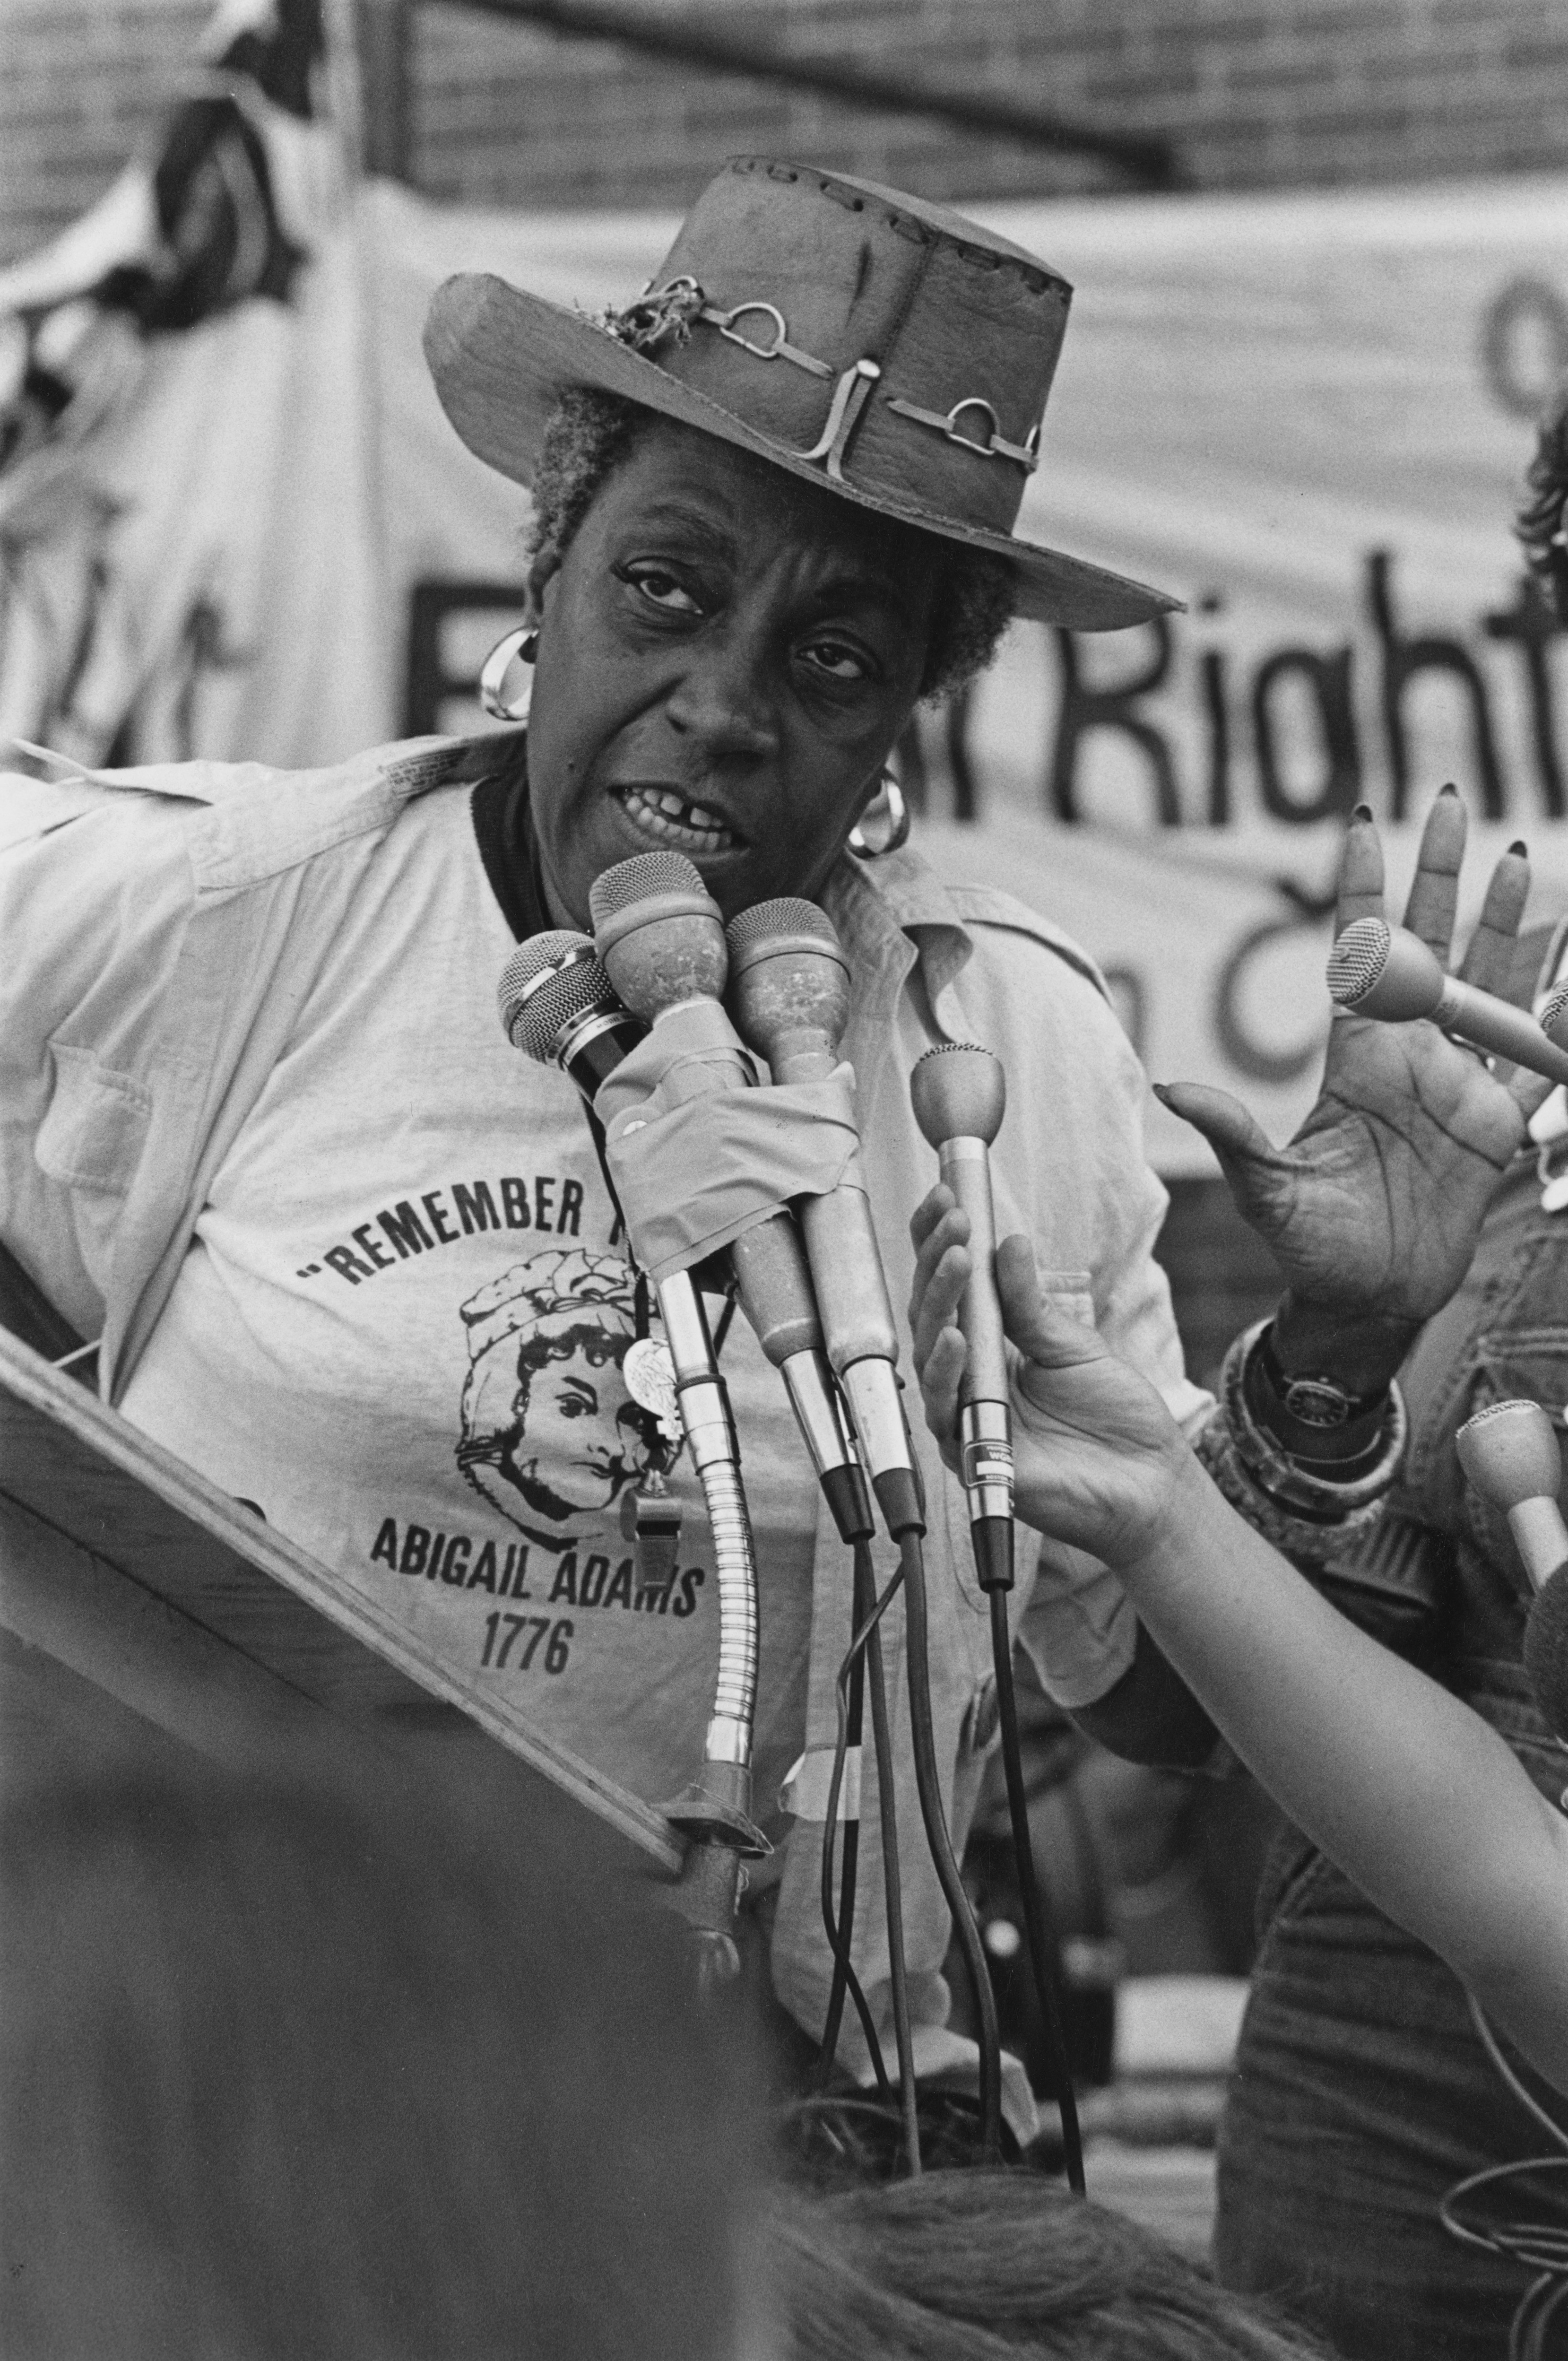 American lawyer, activist, civil rights advocate, and feminist, Florynce 'Flo' Kennedy (1916 - 2000), addresses the crowd at a Women's Day Rally in Boston, Massachusetts, USA, 26th August 1976. (Photo by Barbara Alper/Getty Images) (Getty Images—2014 Barbara Alper)